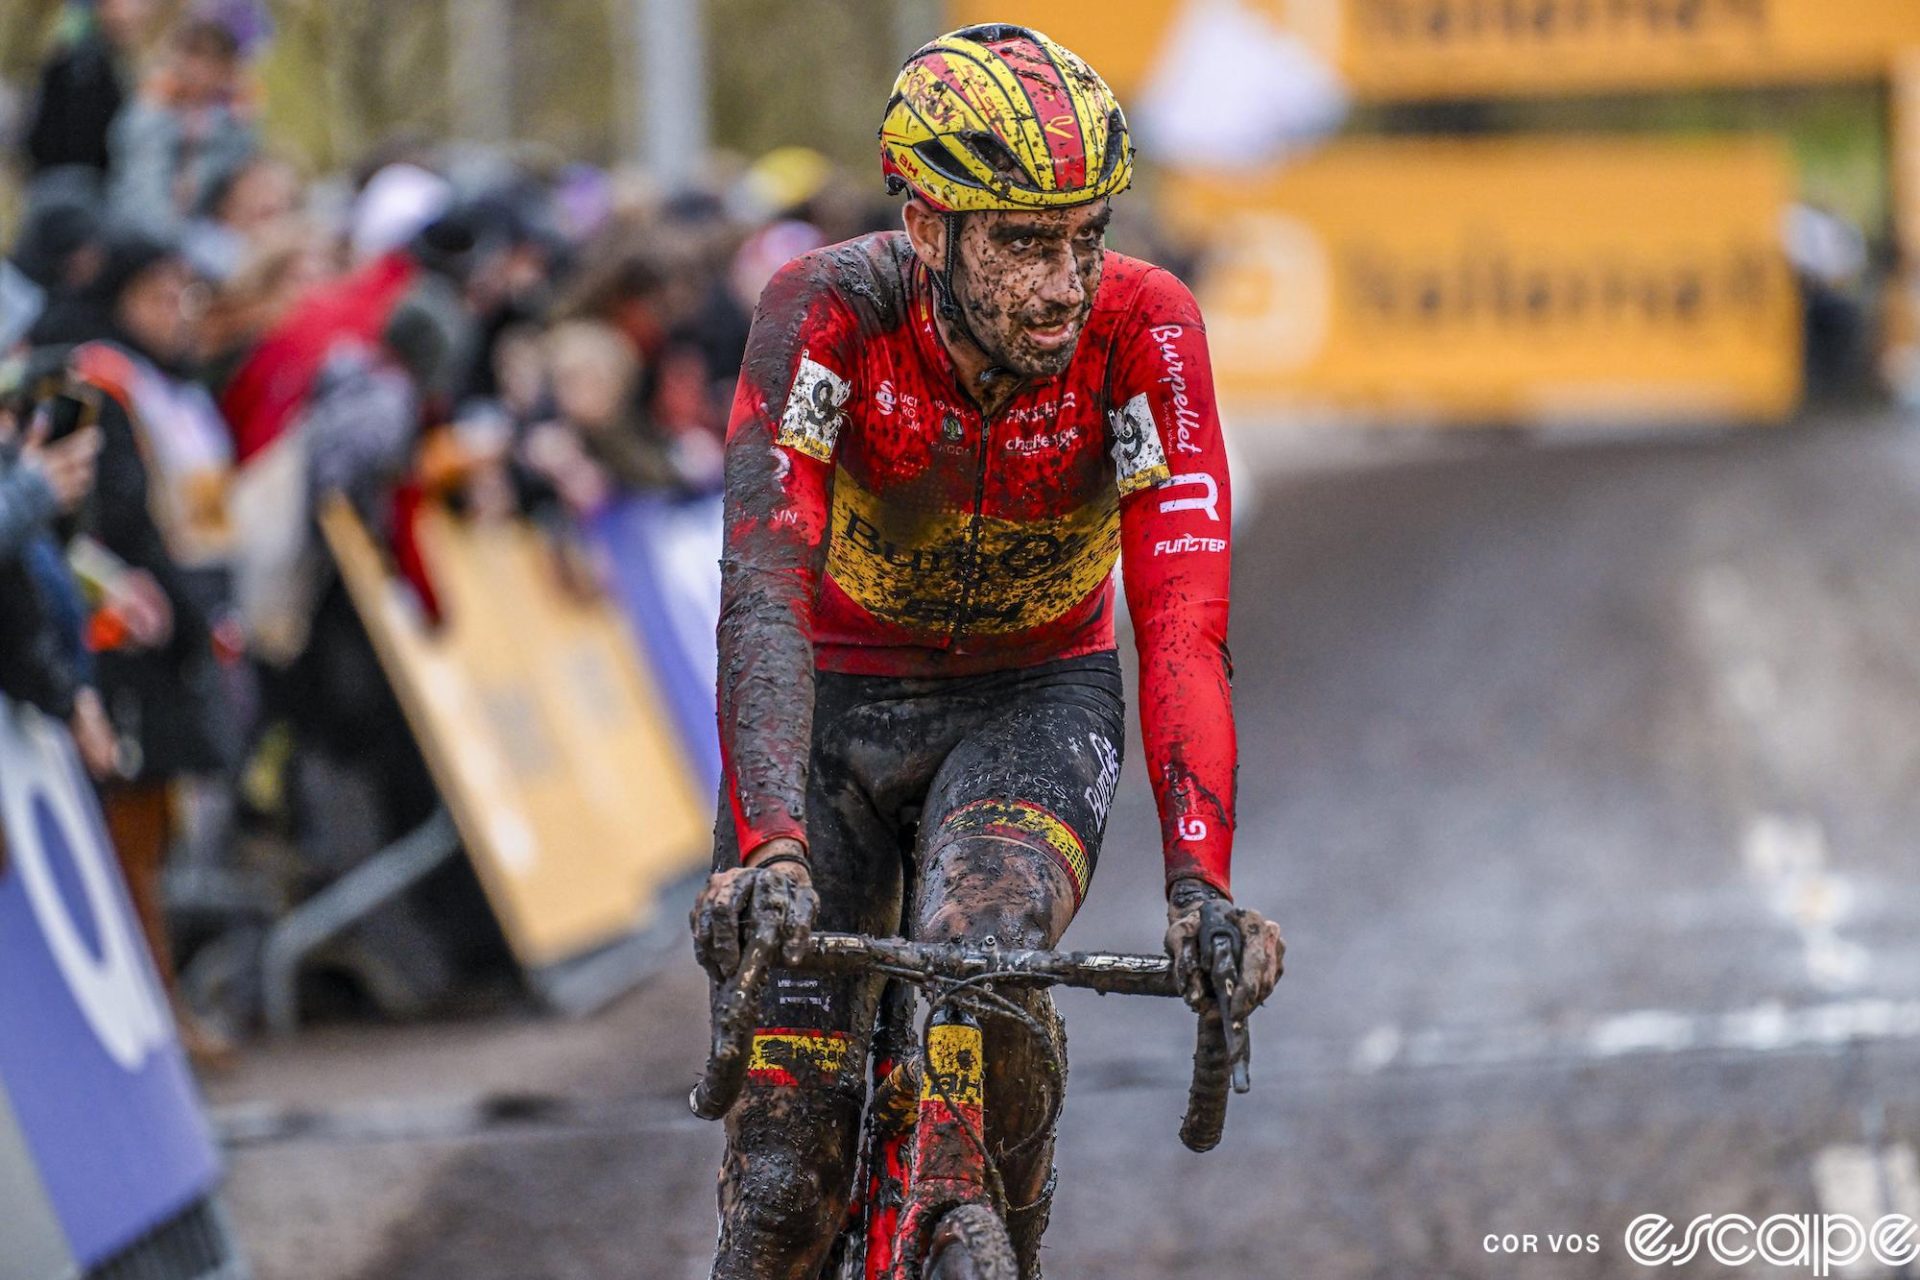 Felipe Orts finishes the Niel round of the Superprestige. He's also covered in mud and looks kinda shocked, thousand-yard-stare.